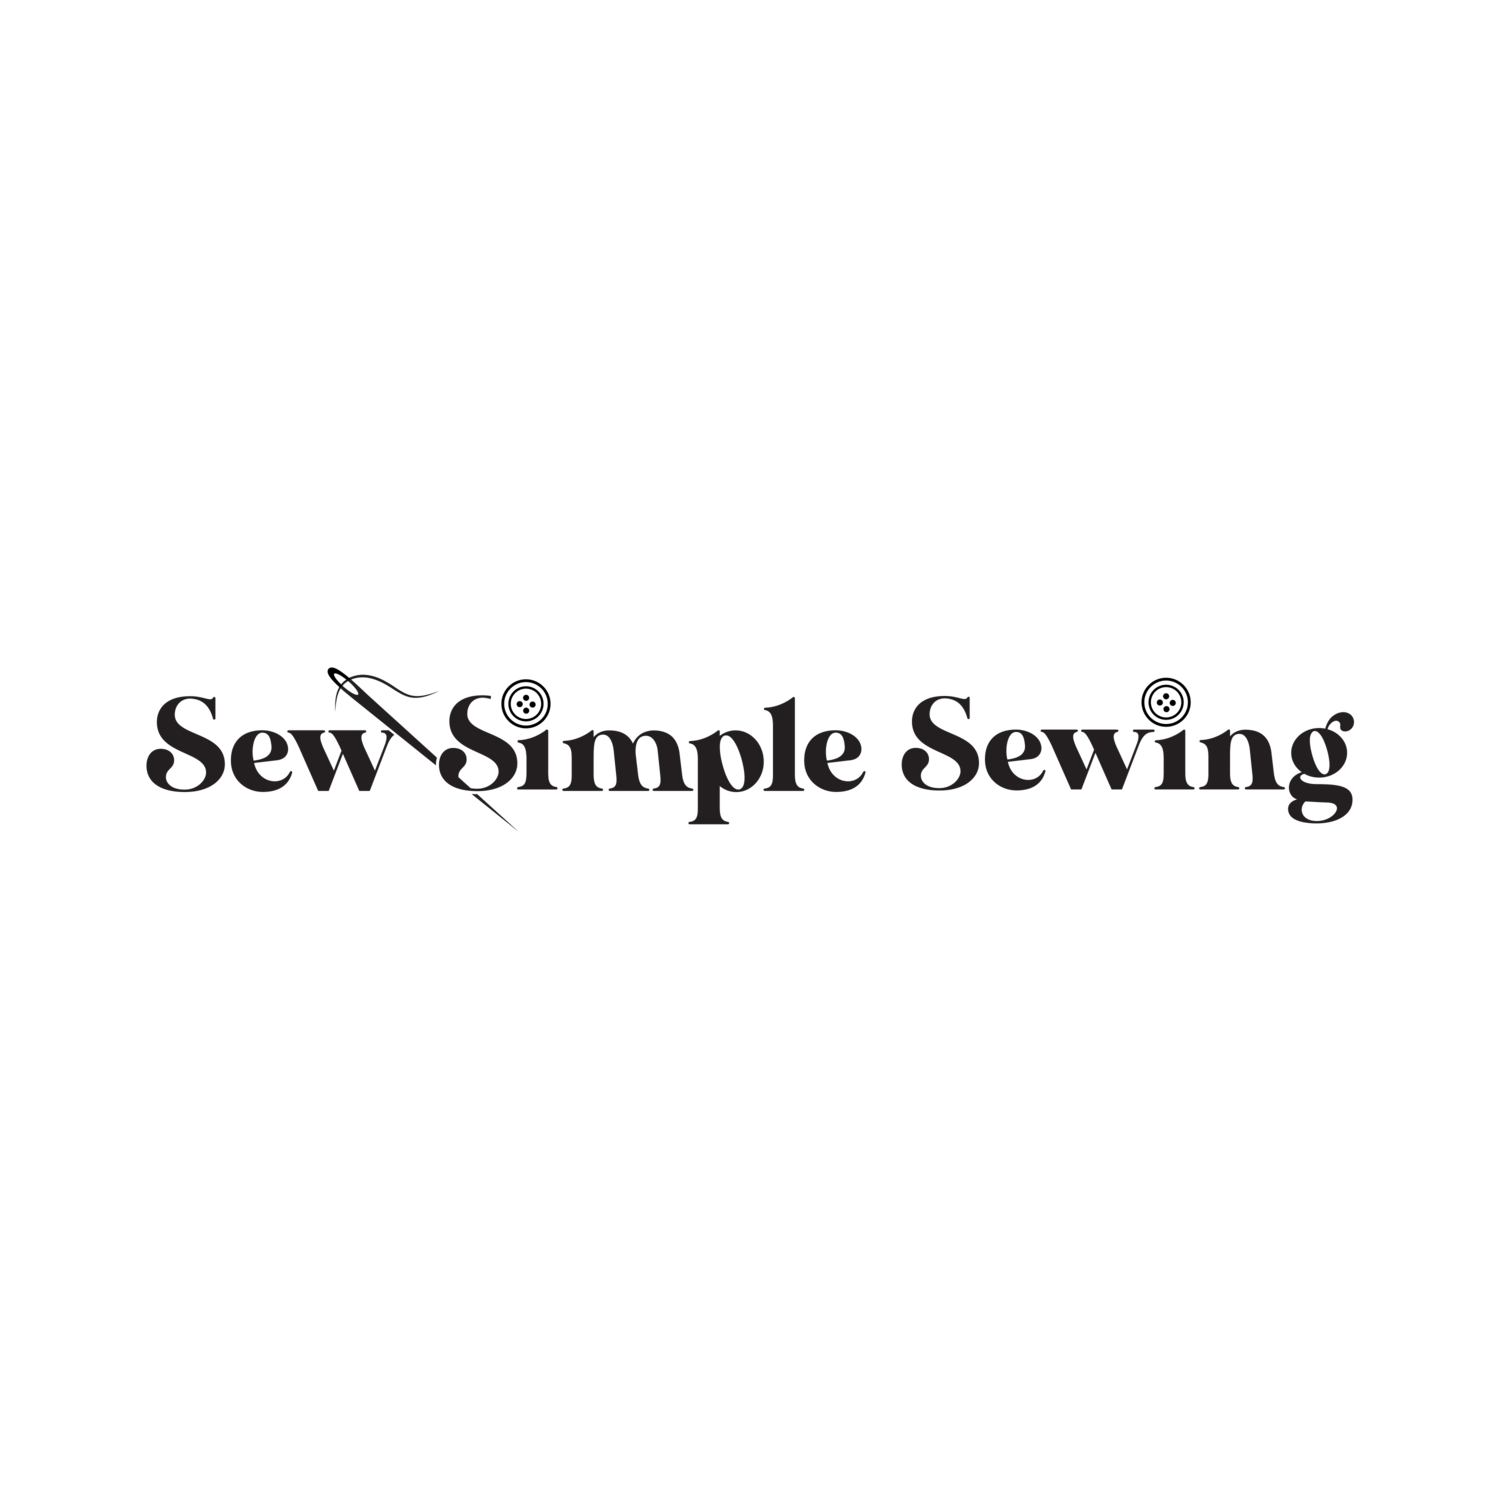 Sew Simple Sewing